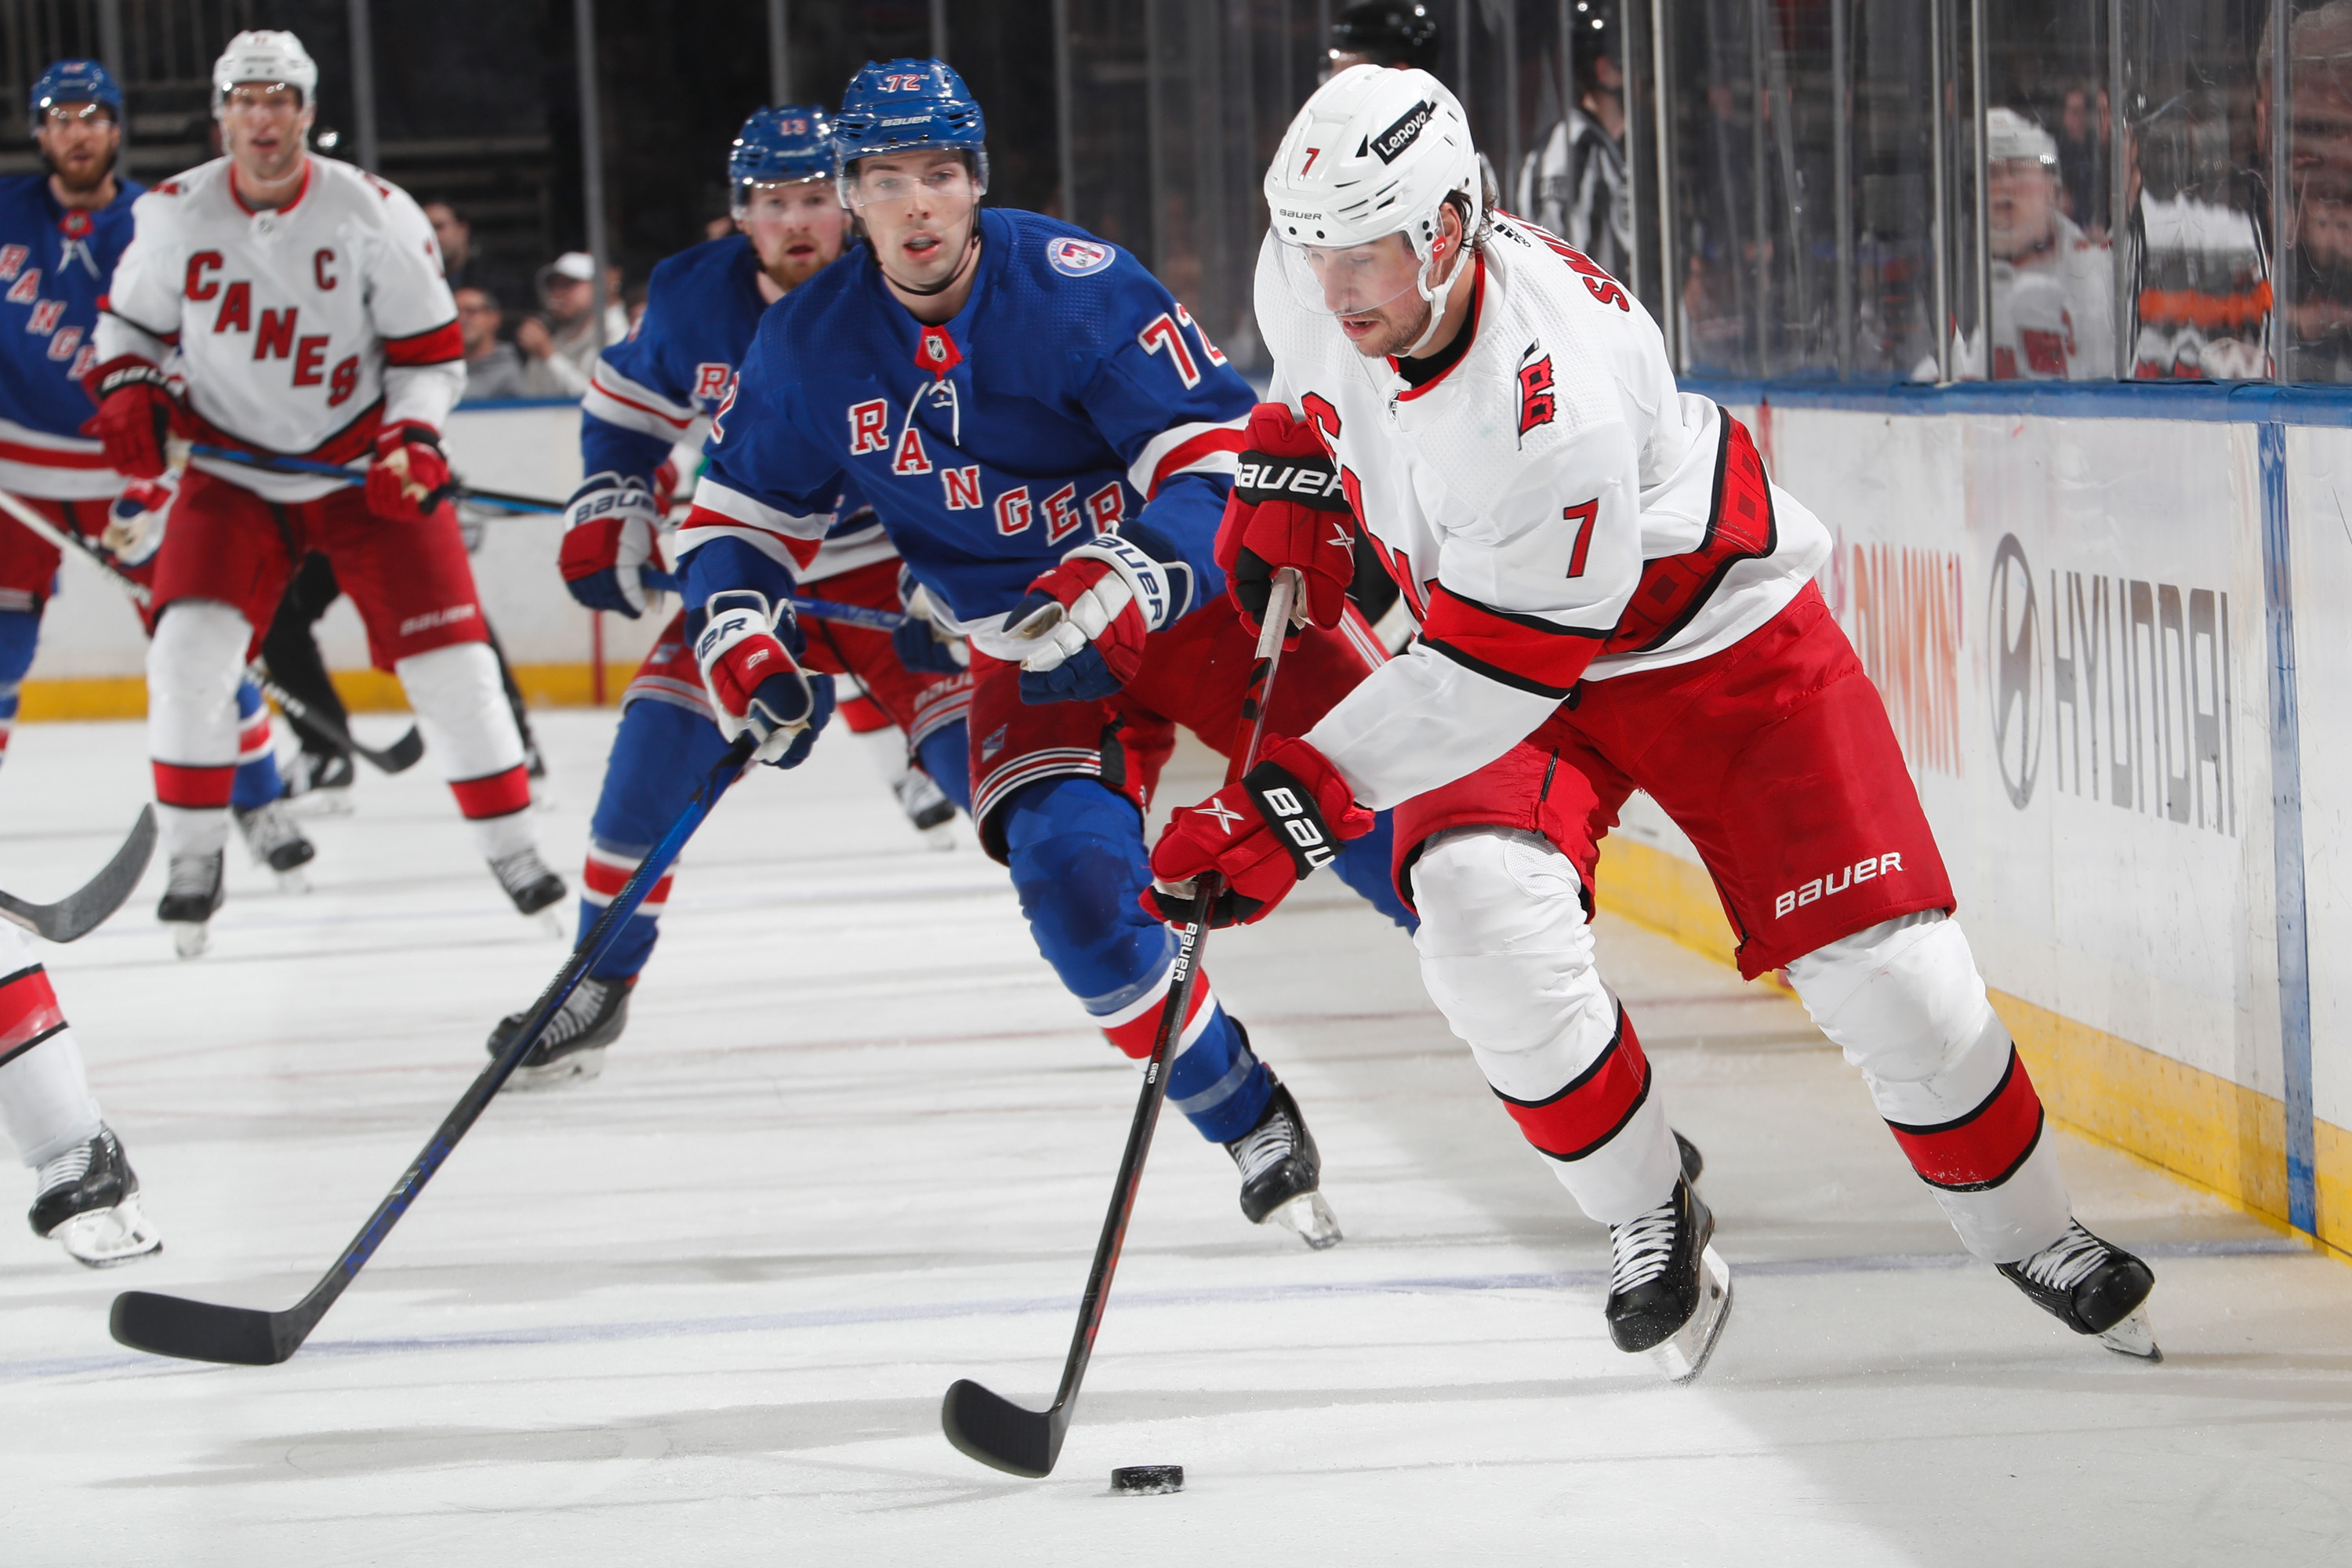 Brendan Smith #7 of the Carolina Hurricanes skates with the puck against Filip Chytil #72 of the New York Rangers at Madison Square Garden on April 26, 2022 in New York City.